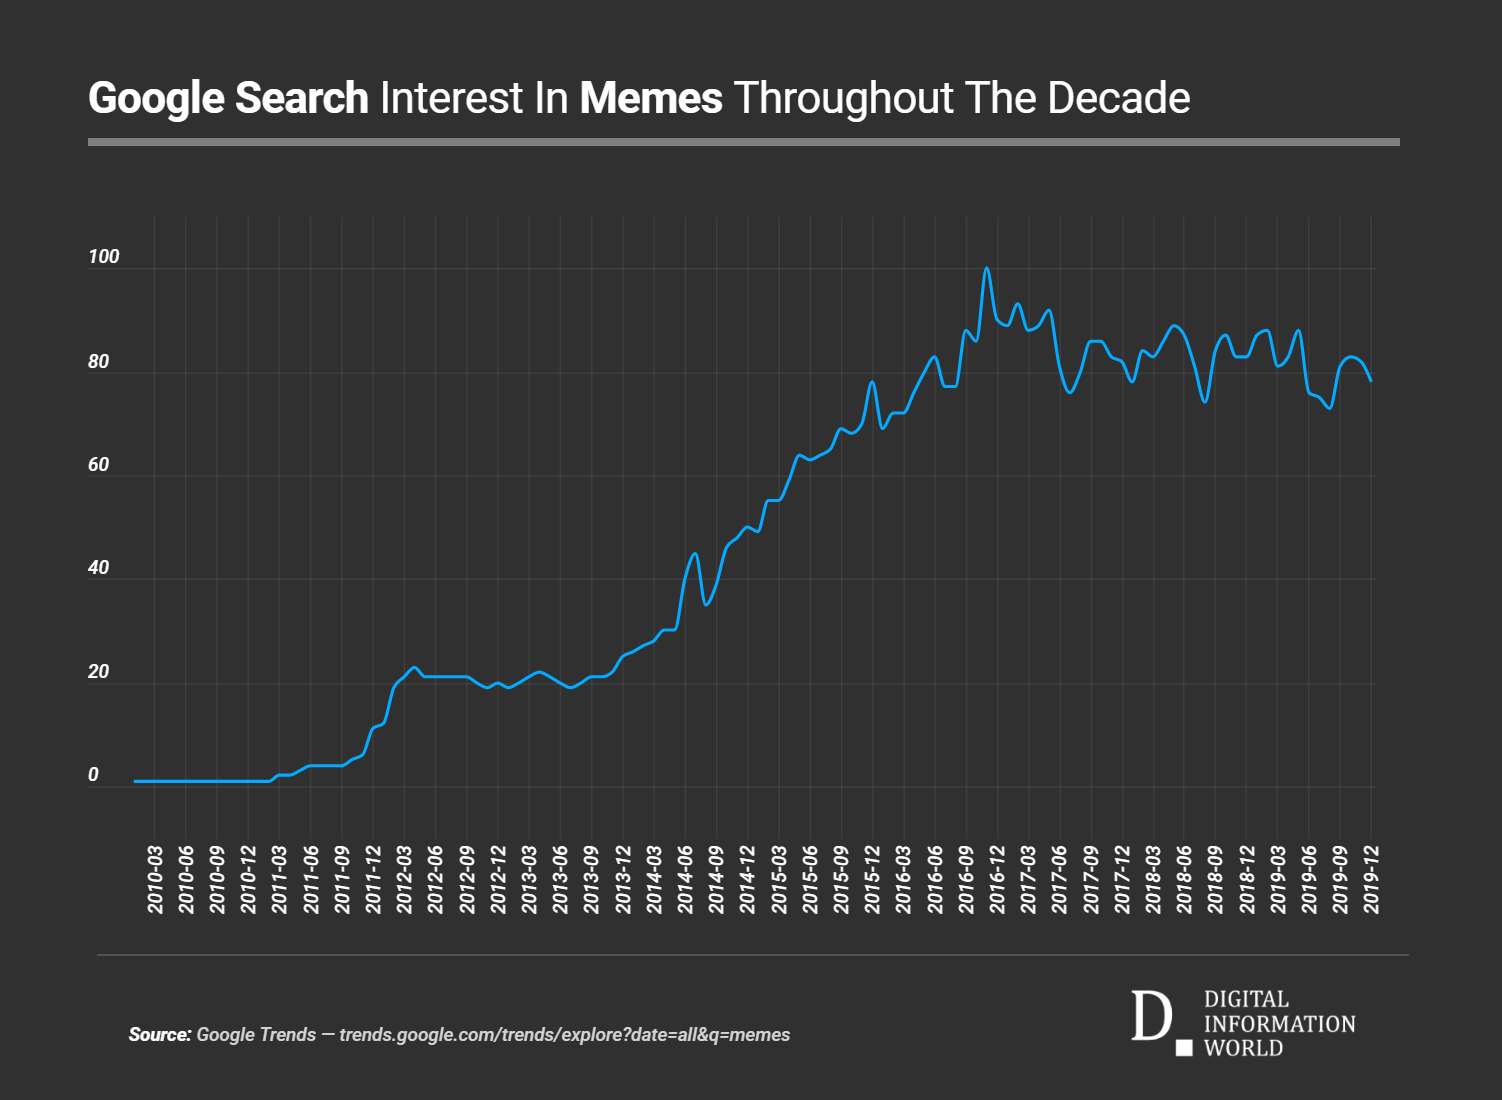 Google Search Interest in Memes